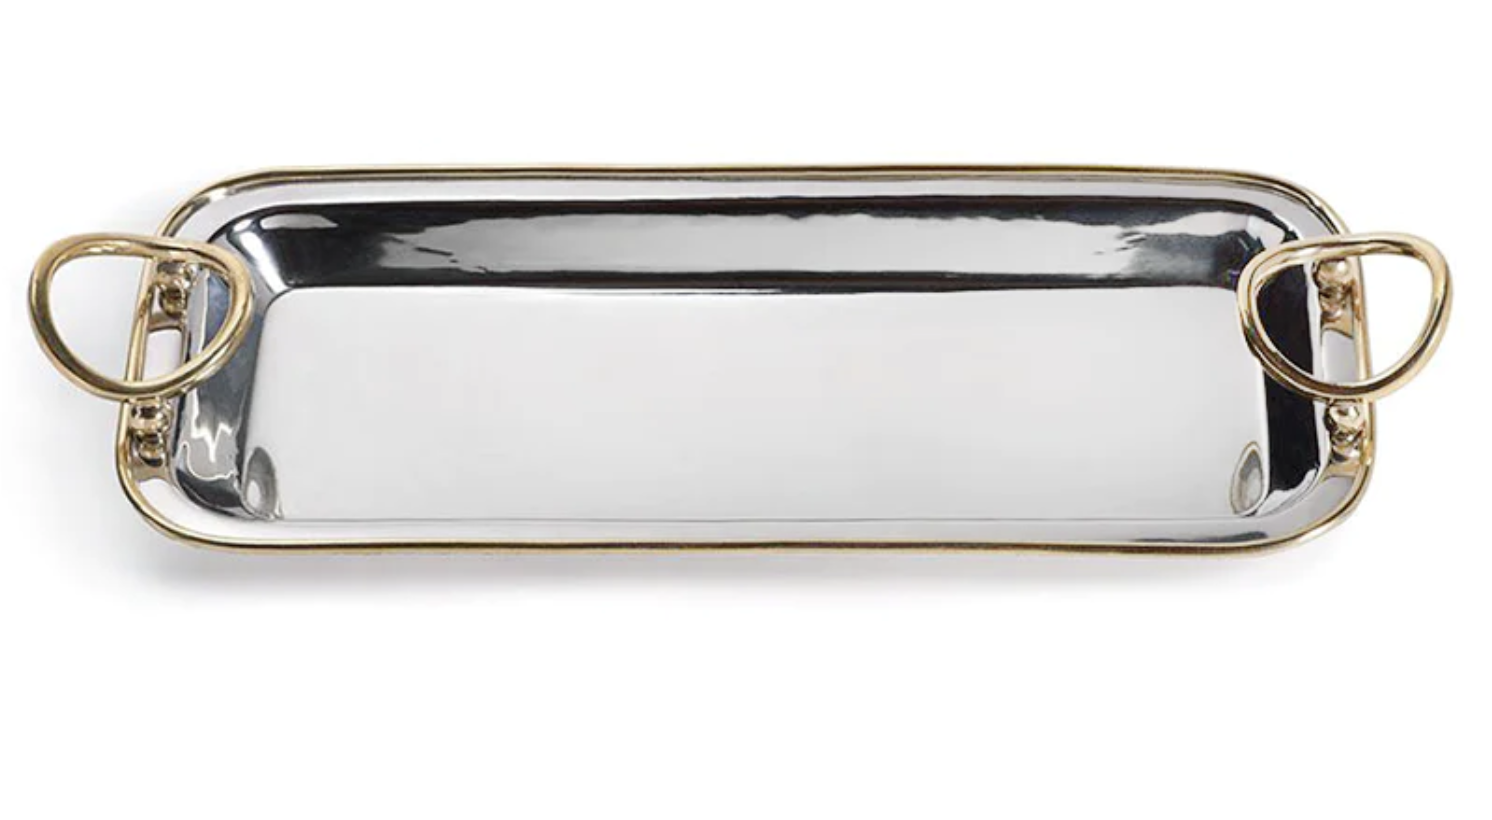 ZODAX polished nickel and gold tray